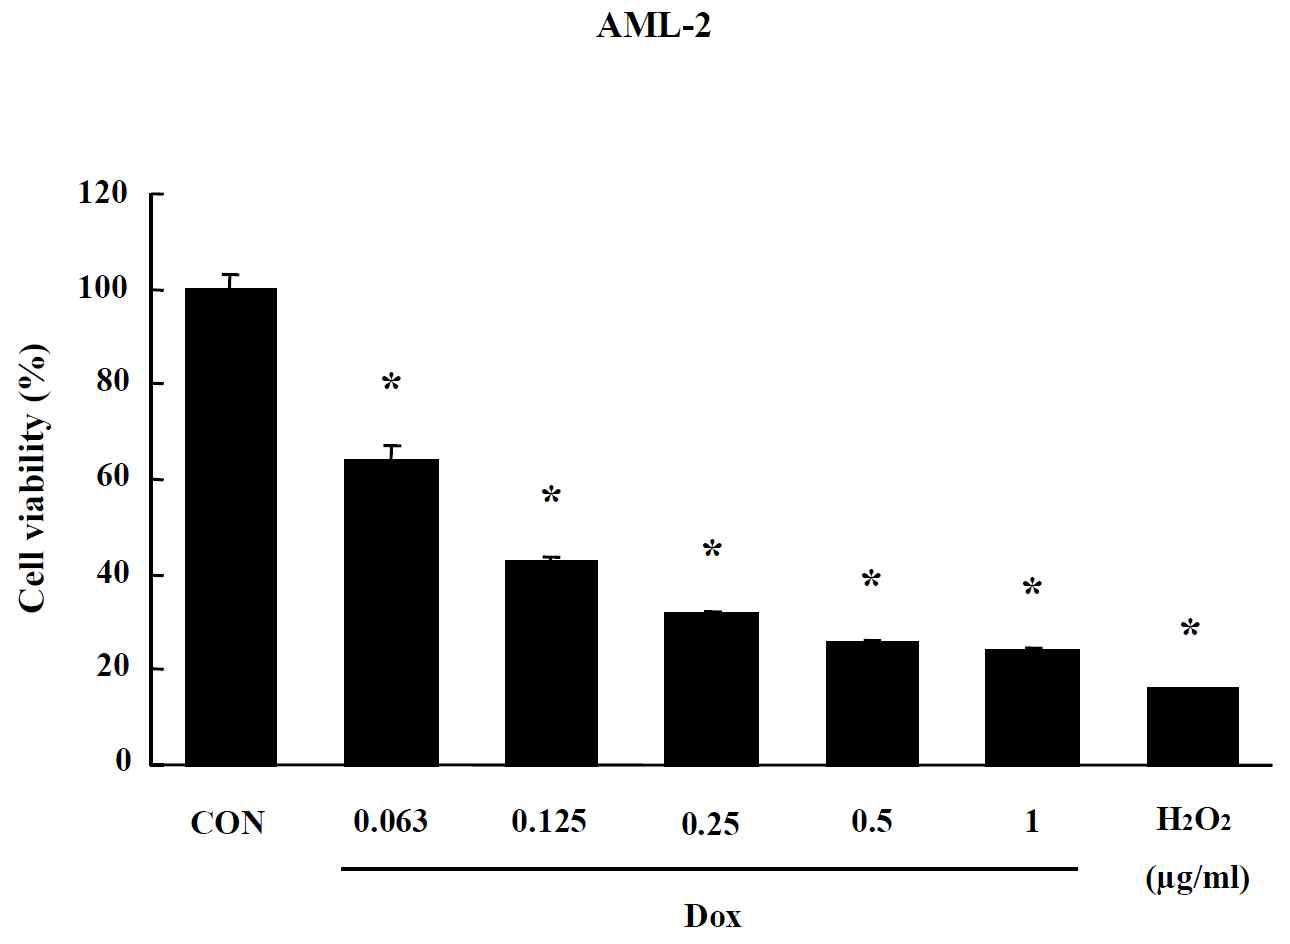 Effects of Dox on MTT assay in AML-2 cells. Cells were treated with drug for 24 hr. Data are shown as means ± SE (n = 5). * p<0.05, significantly different from the control.